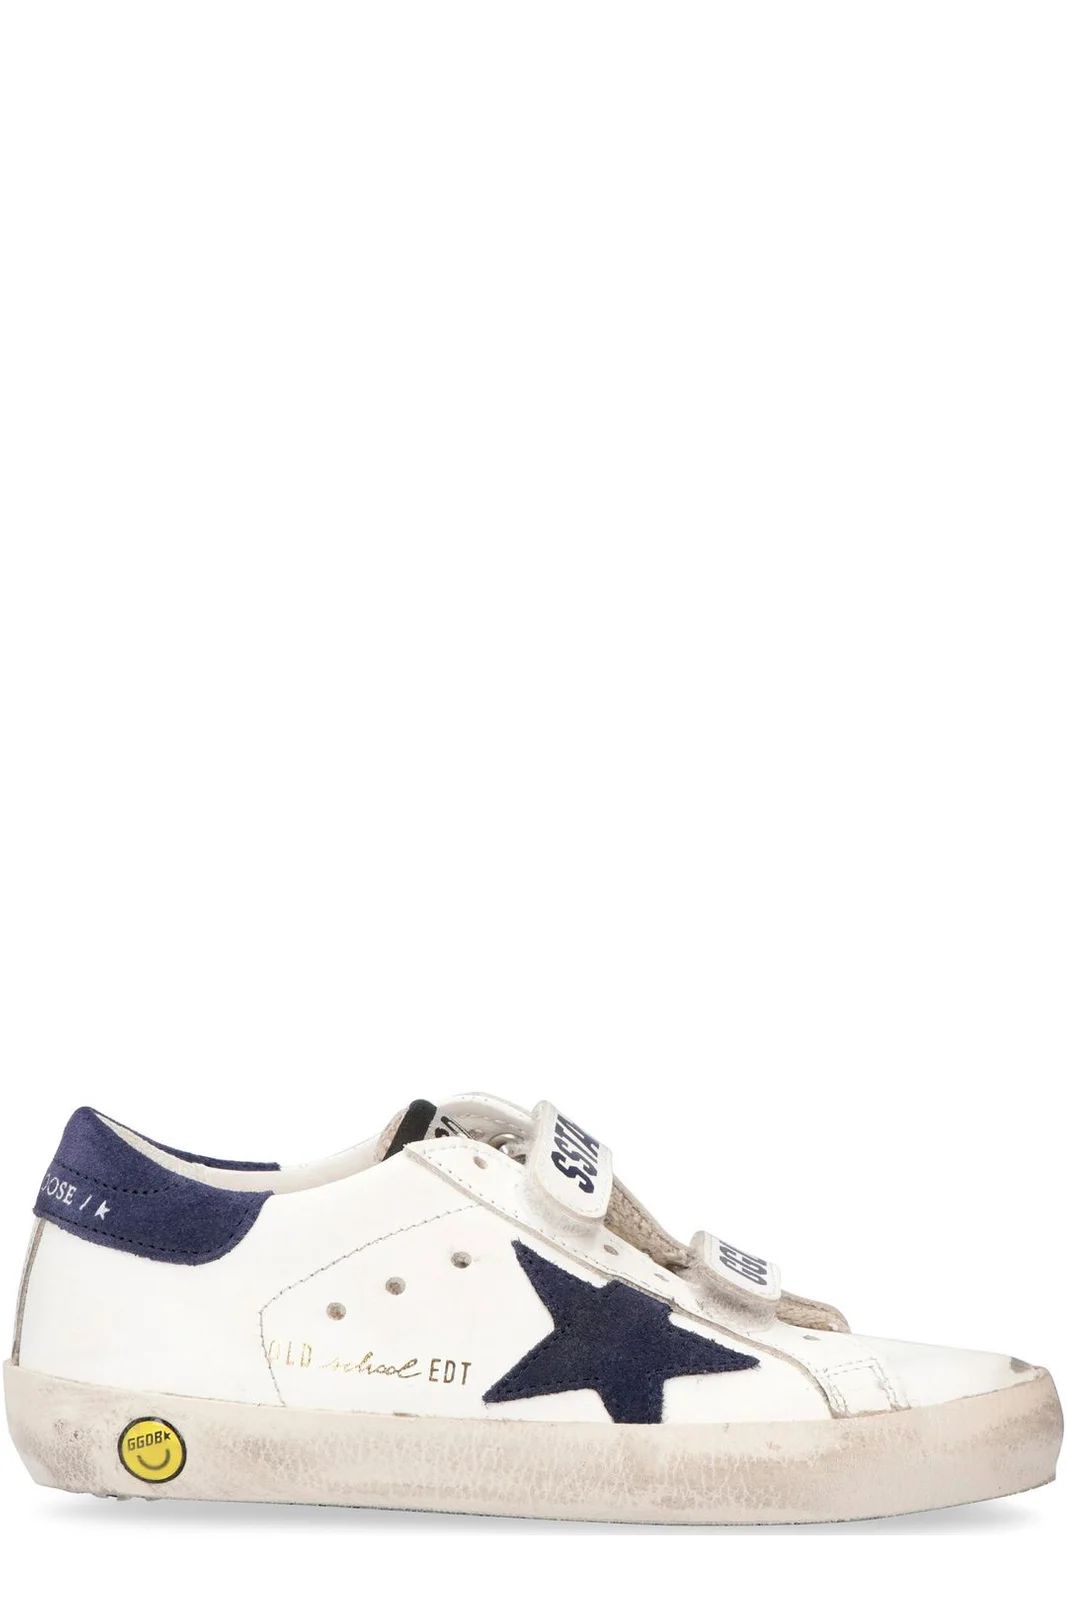 Golden Goose Kids Old School Touch-Strap Sneakers | Cettire Global